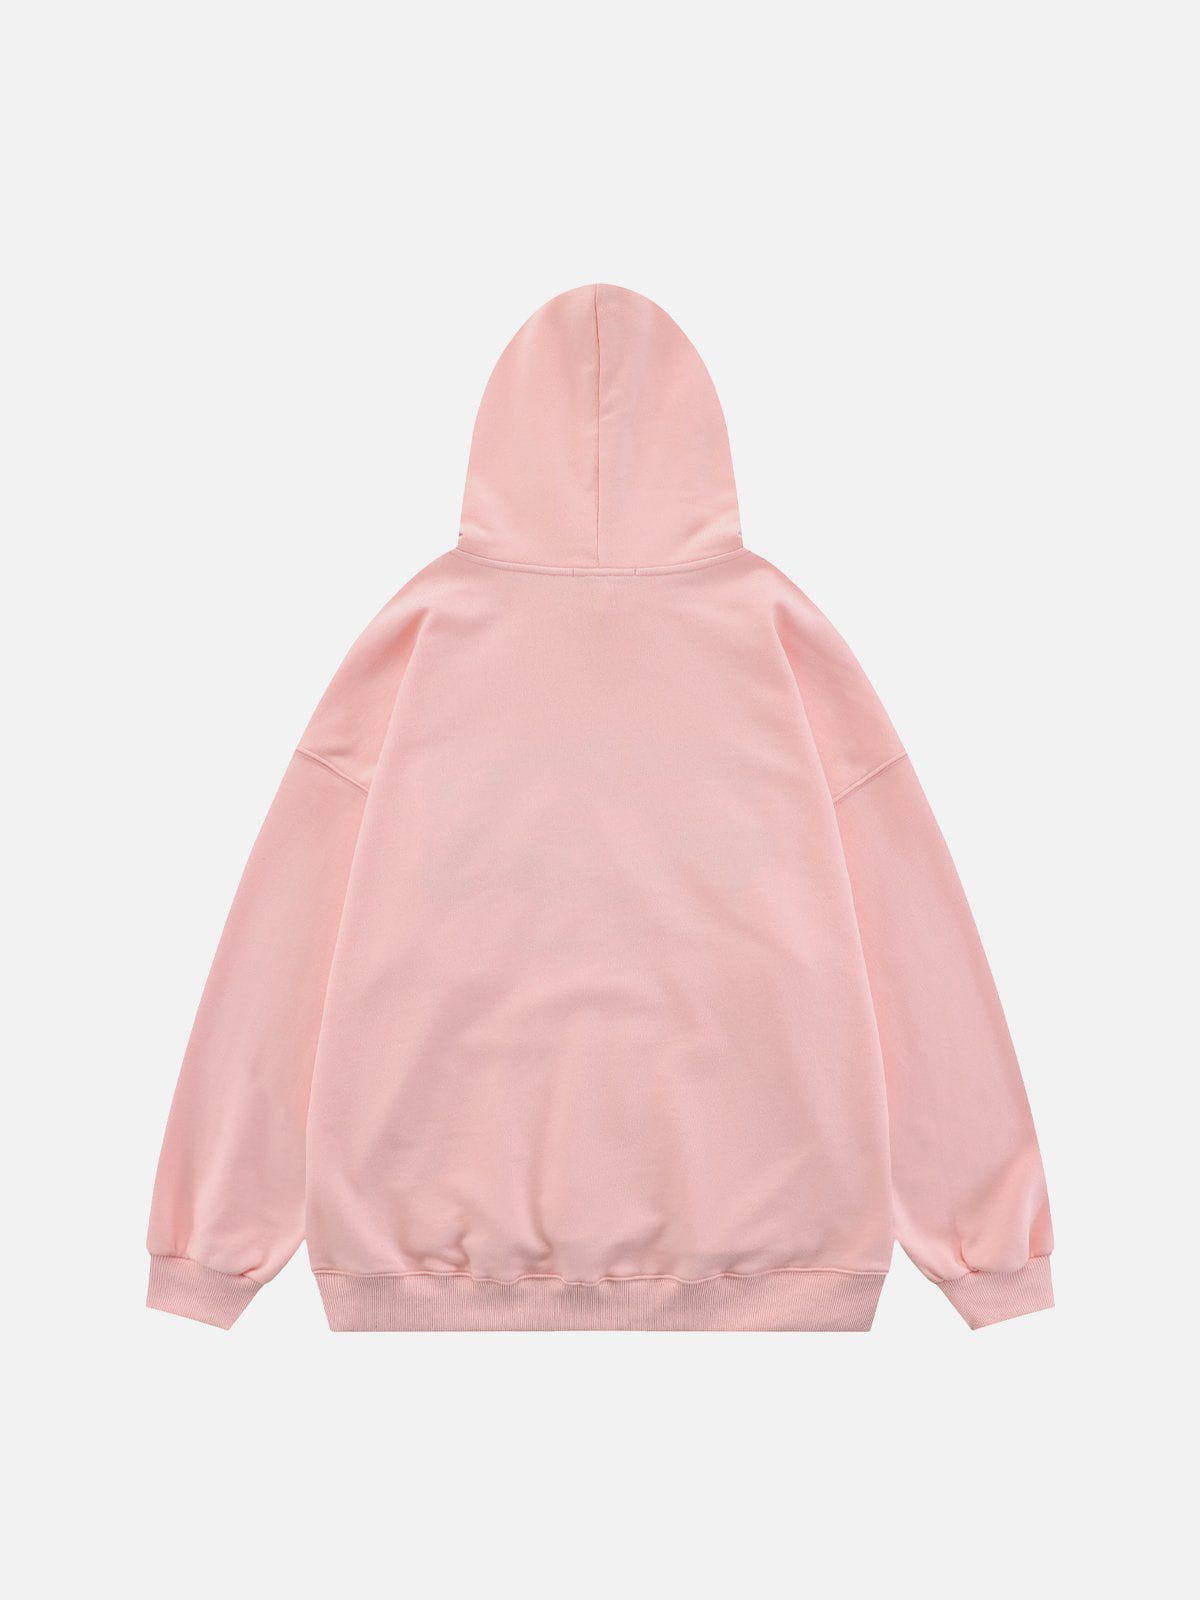 Eprezzy® - Playing Cards Embroidered Hoodie Streetwear Fashion - eprezzy.com